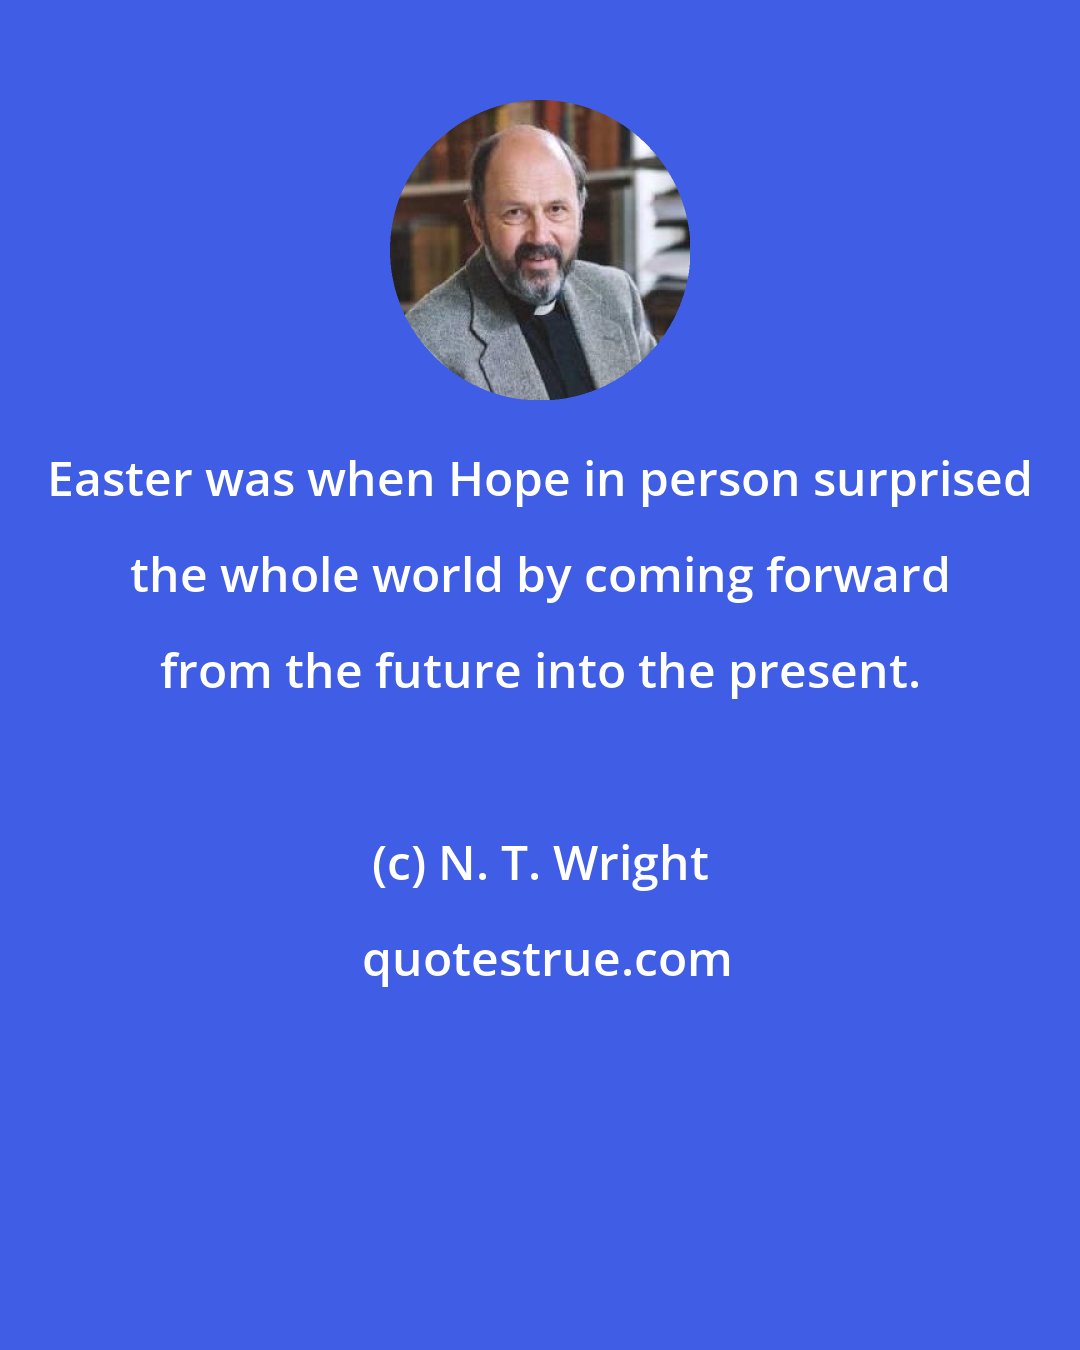 N. T. Wright: Easter was when Hope in person surprised the whole world by coming forward from the future into the present.